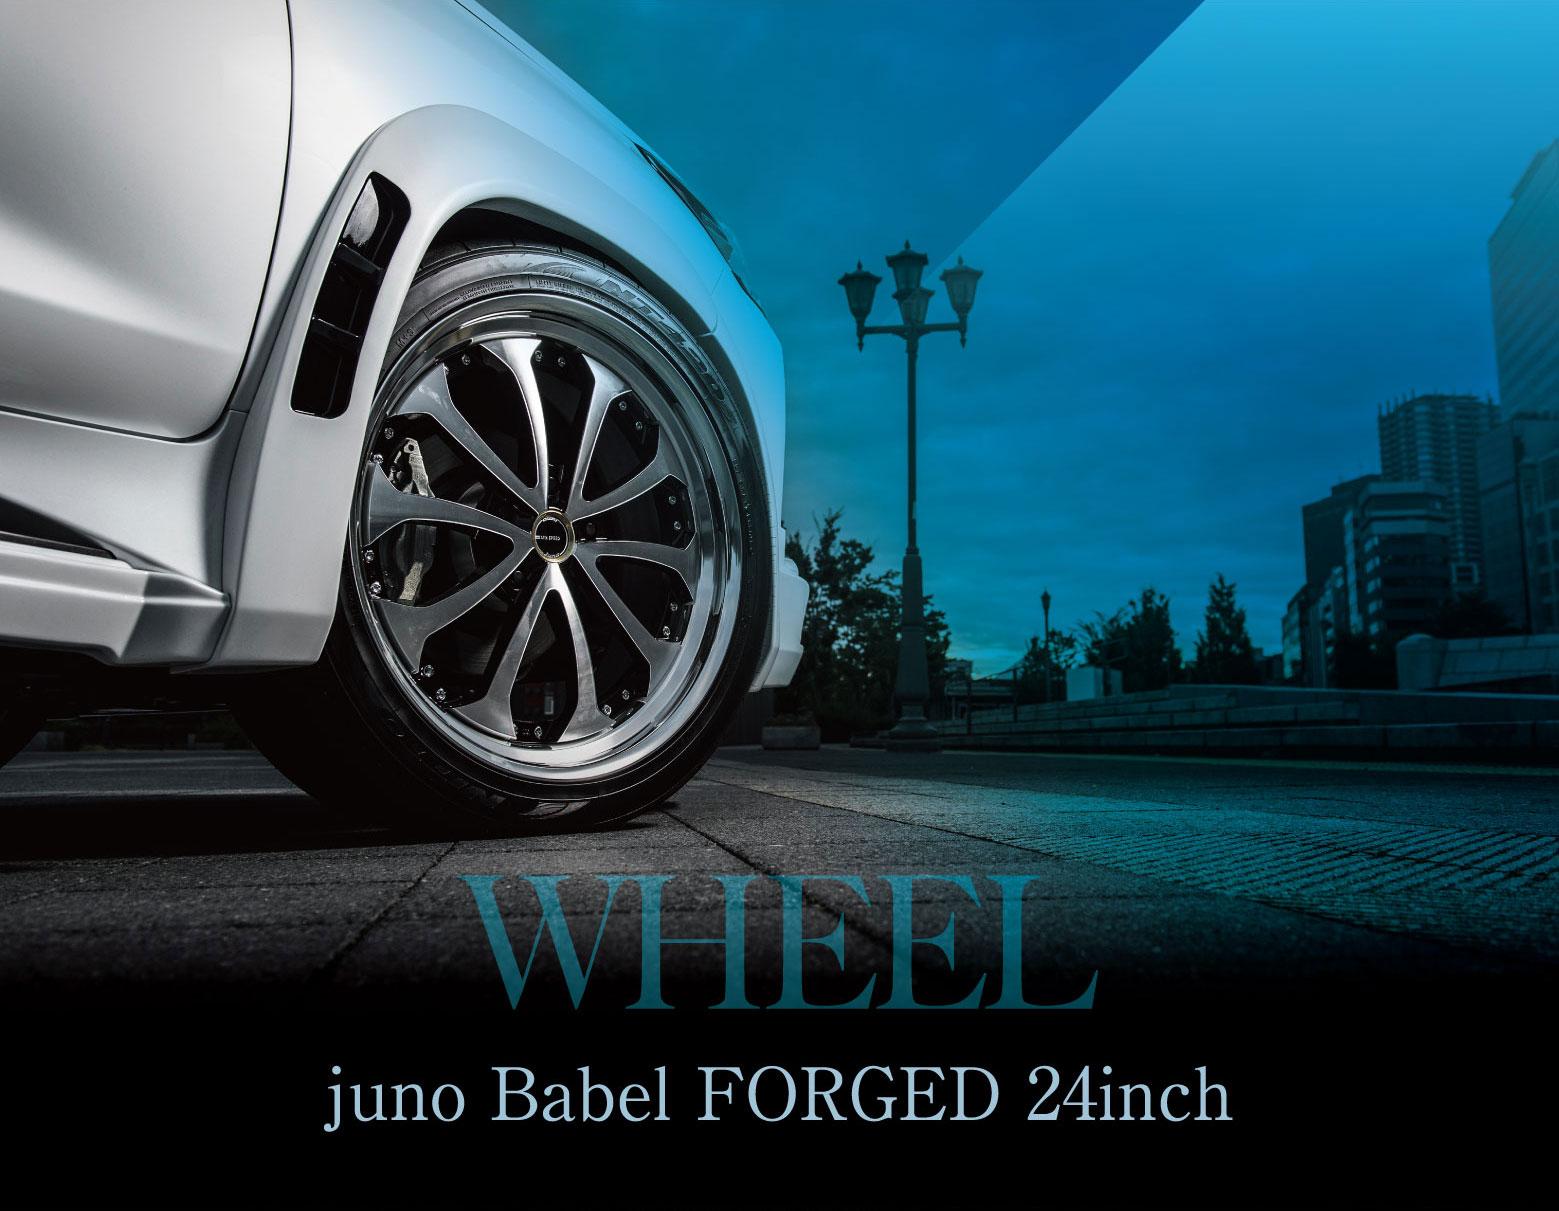 WHEEL juno Babel FORGED 24inch